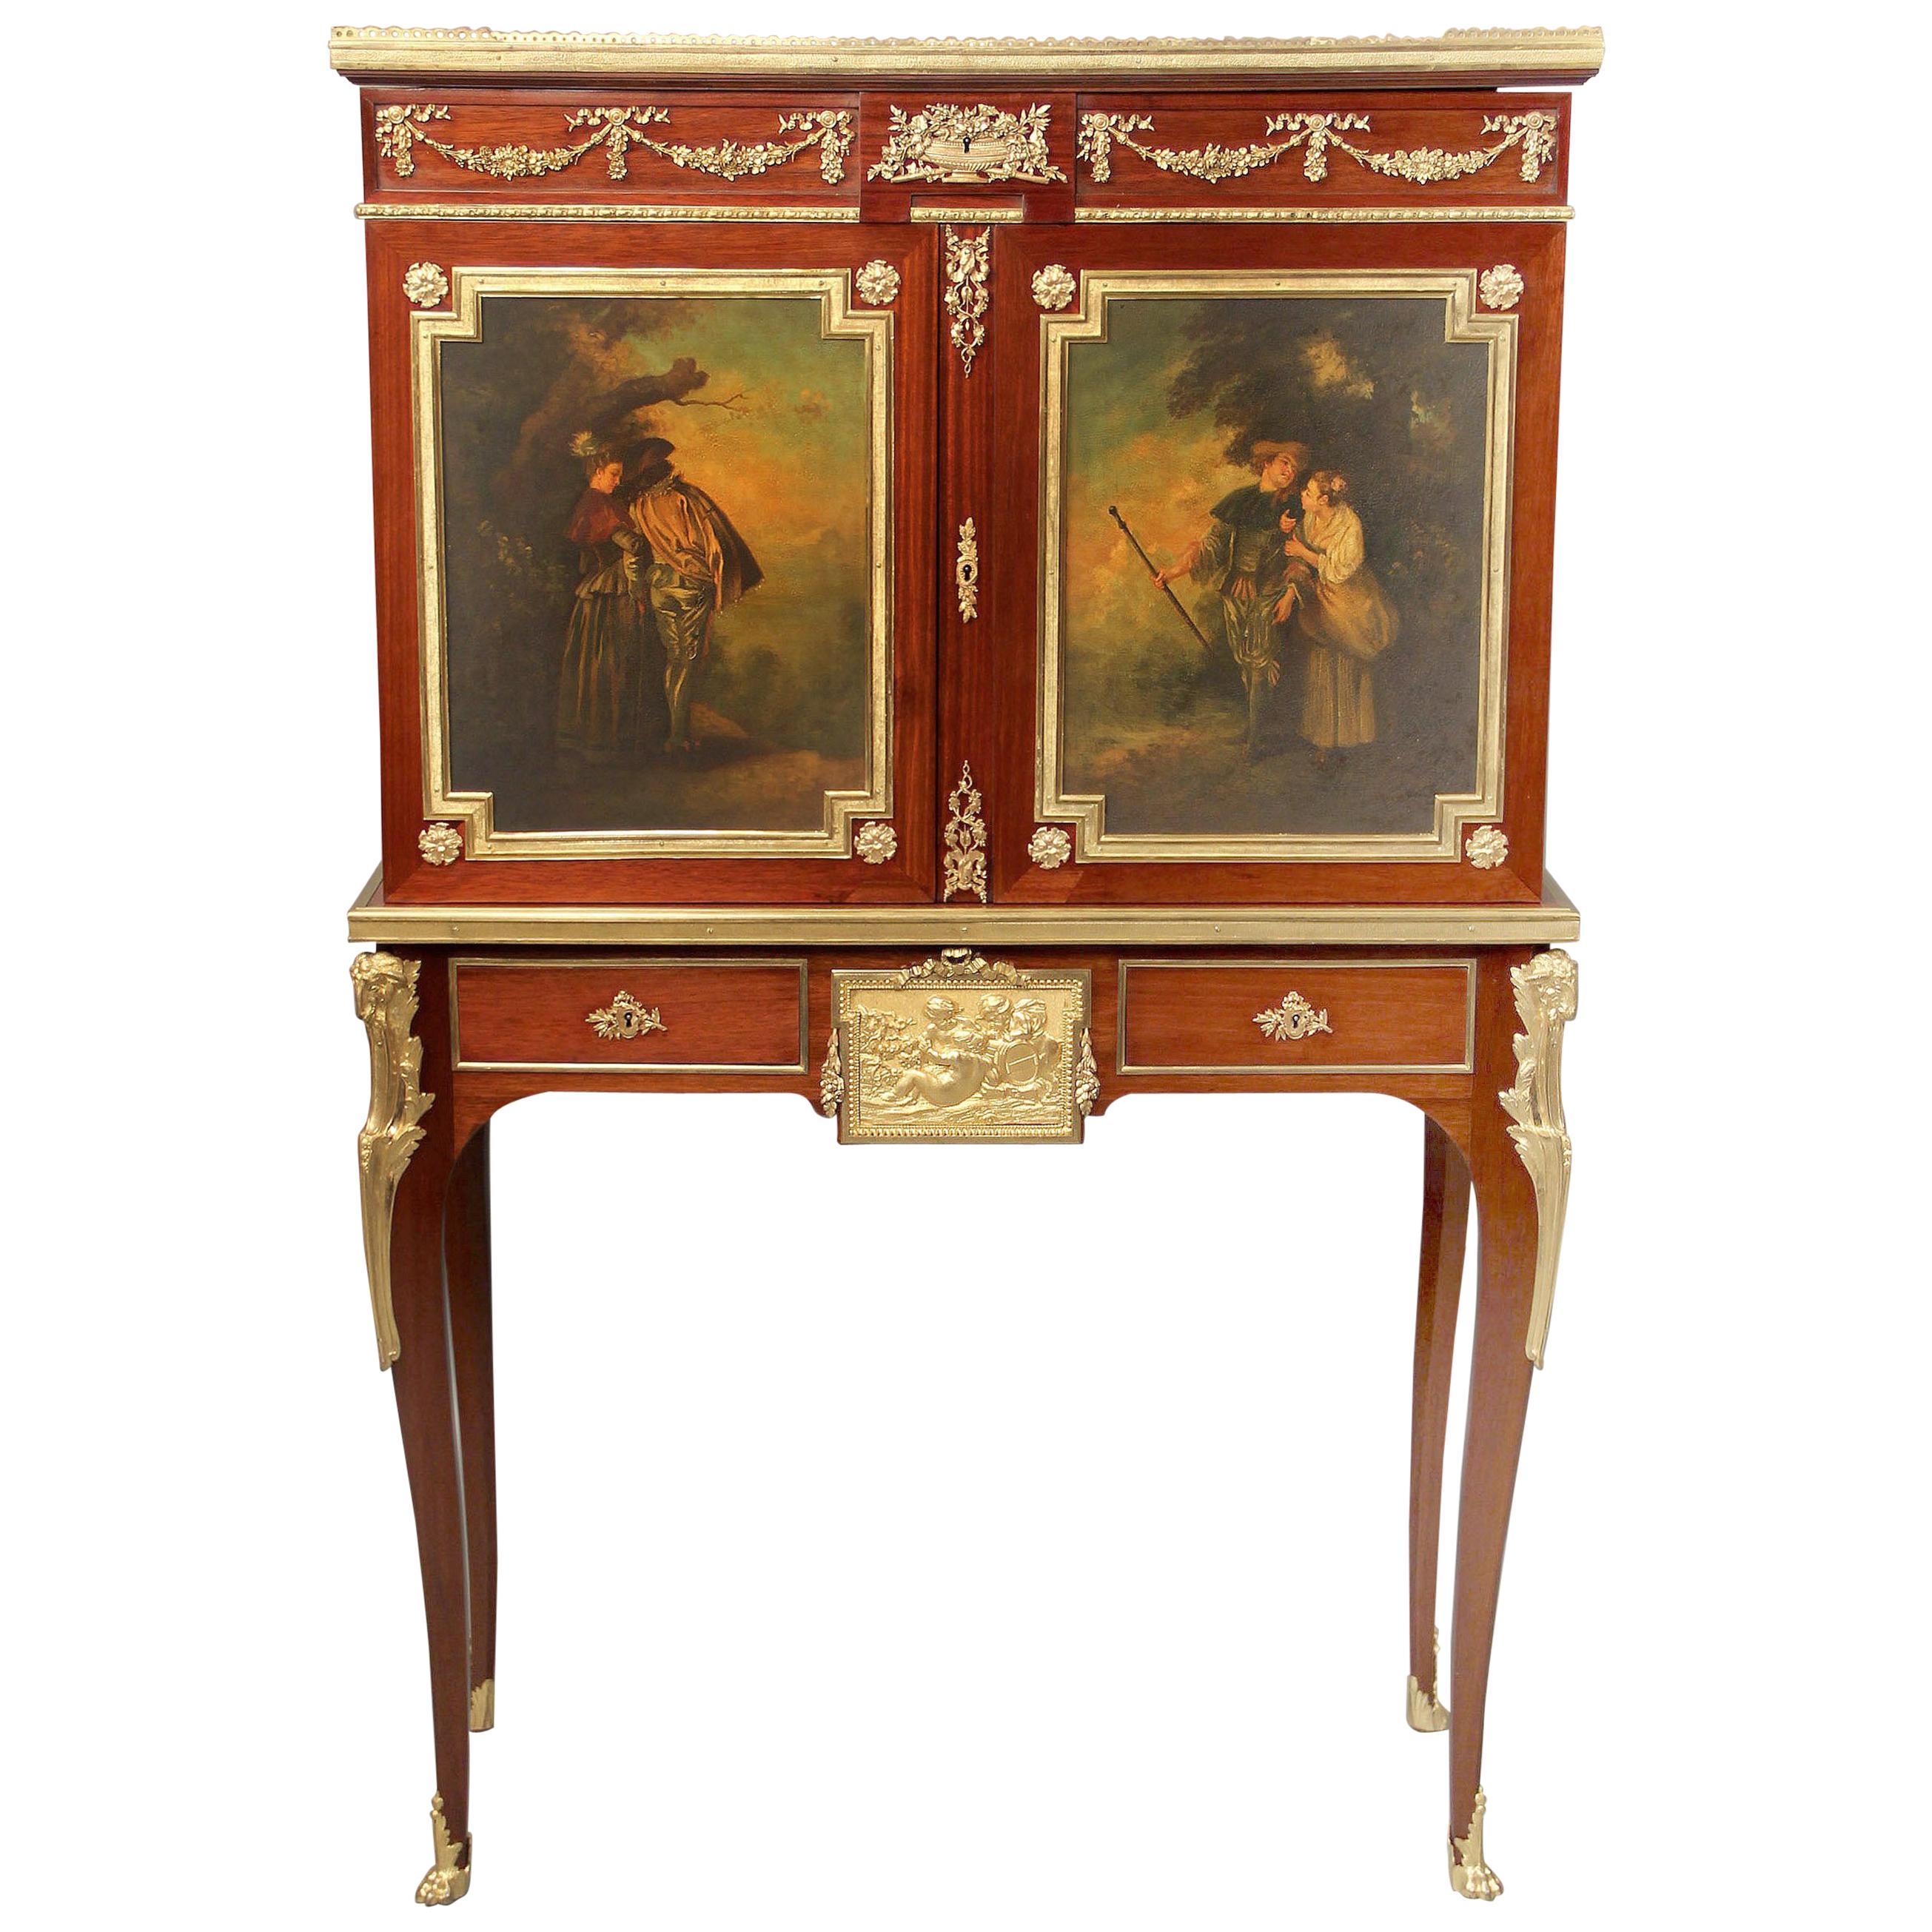 Late 19th Century Gilt Bronze-Mounted Vernis Martin Cabinet by Paul Sormani